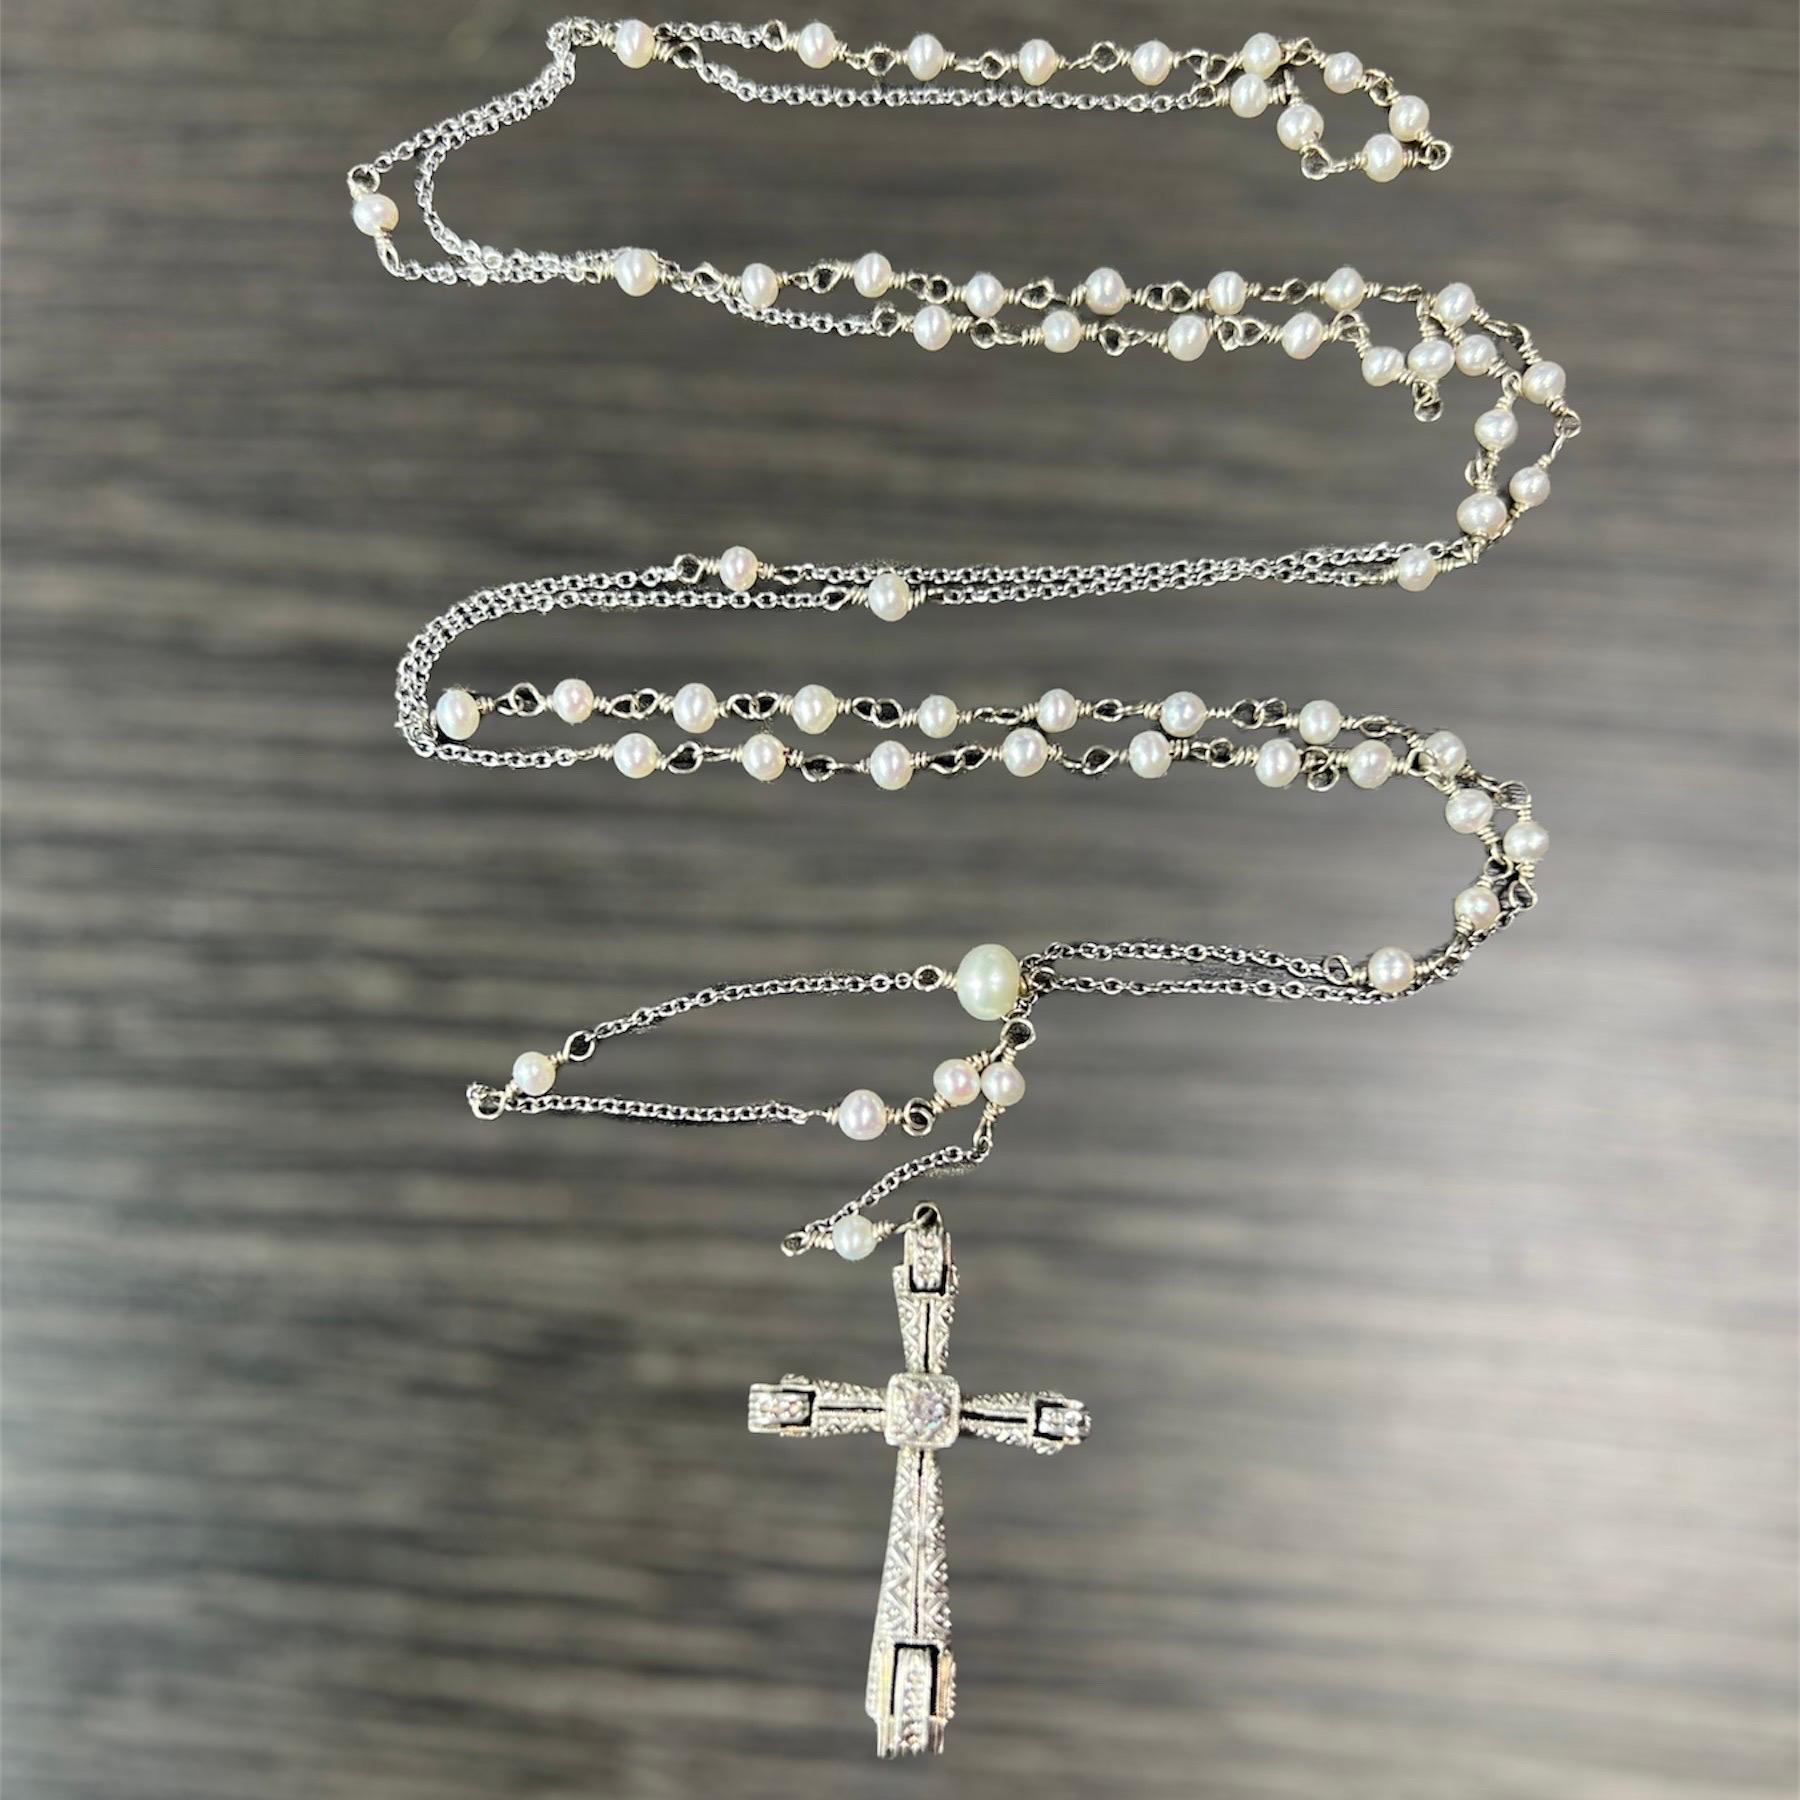 14k gold rosary chain necklace with crucifix